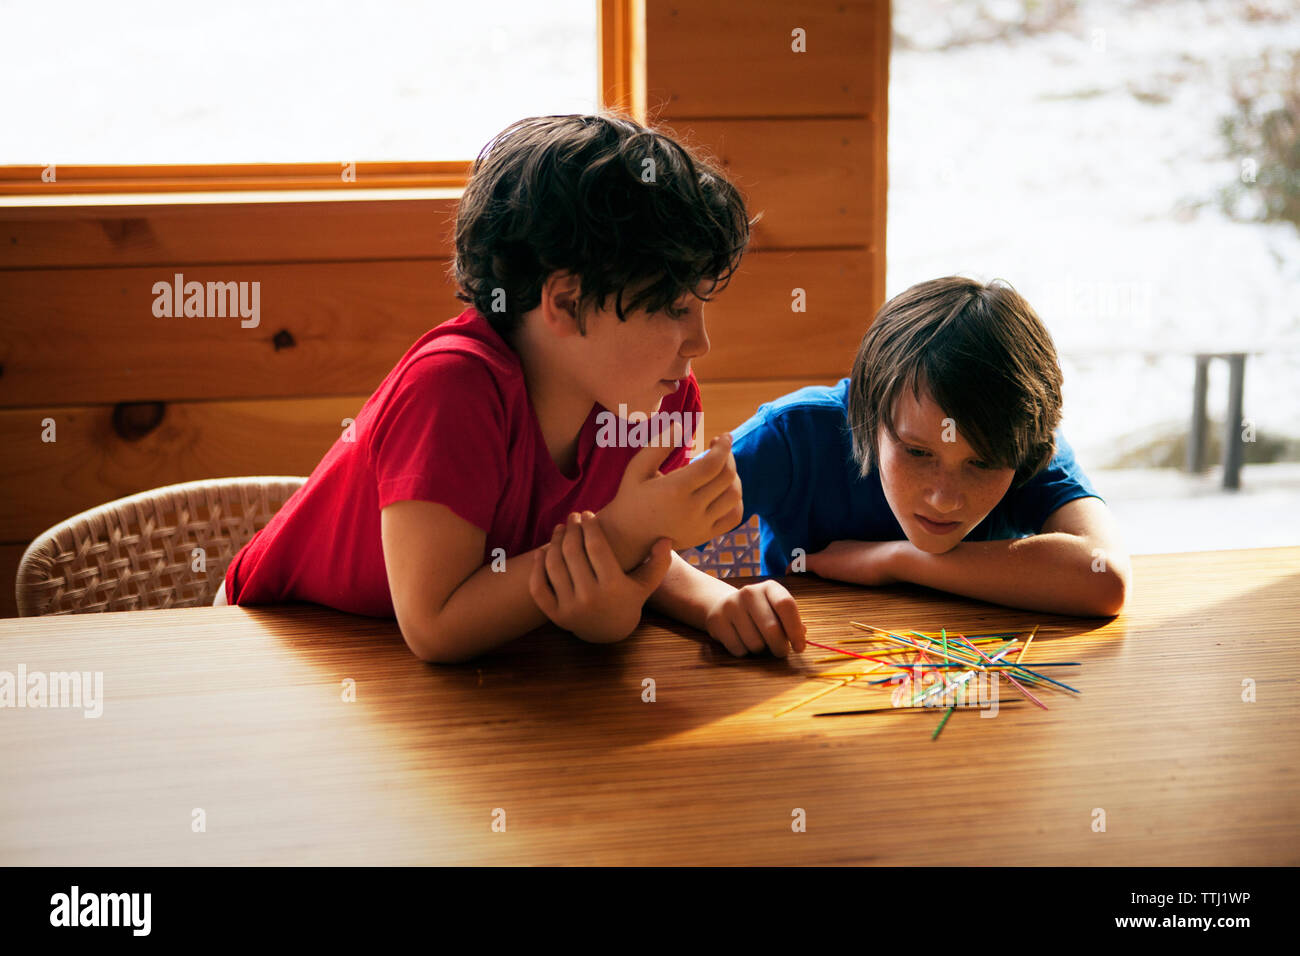 Siblings playing pick up sticks at table in home Stock Photo